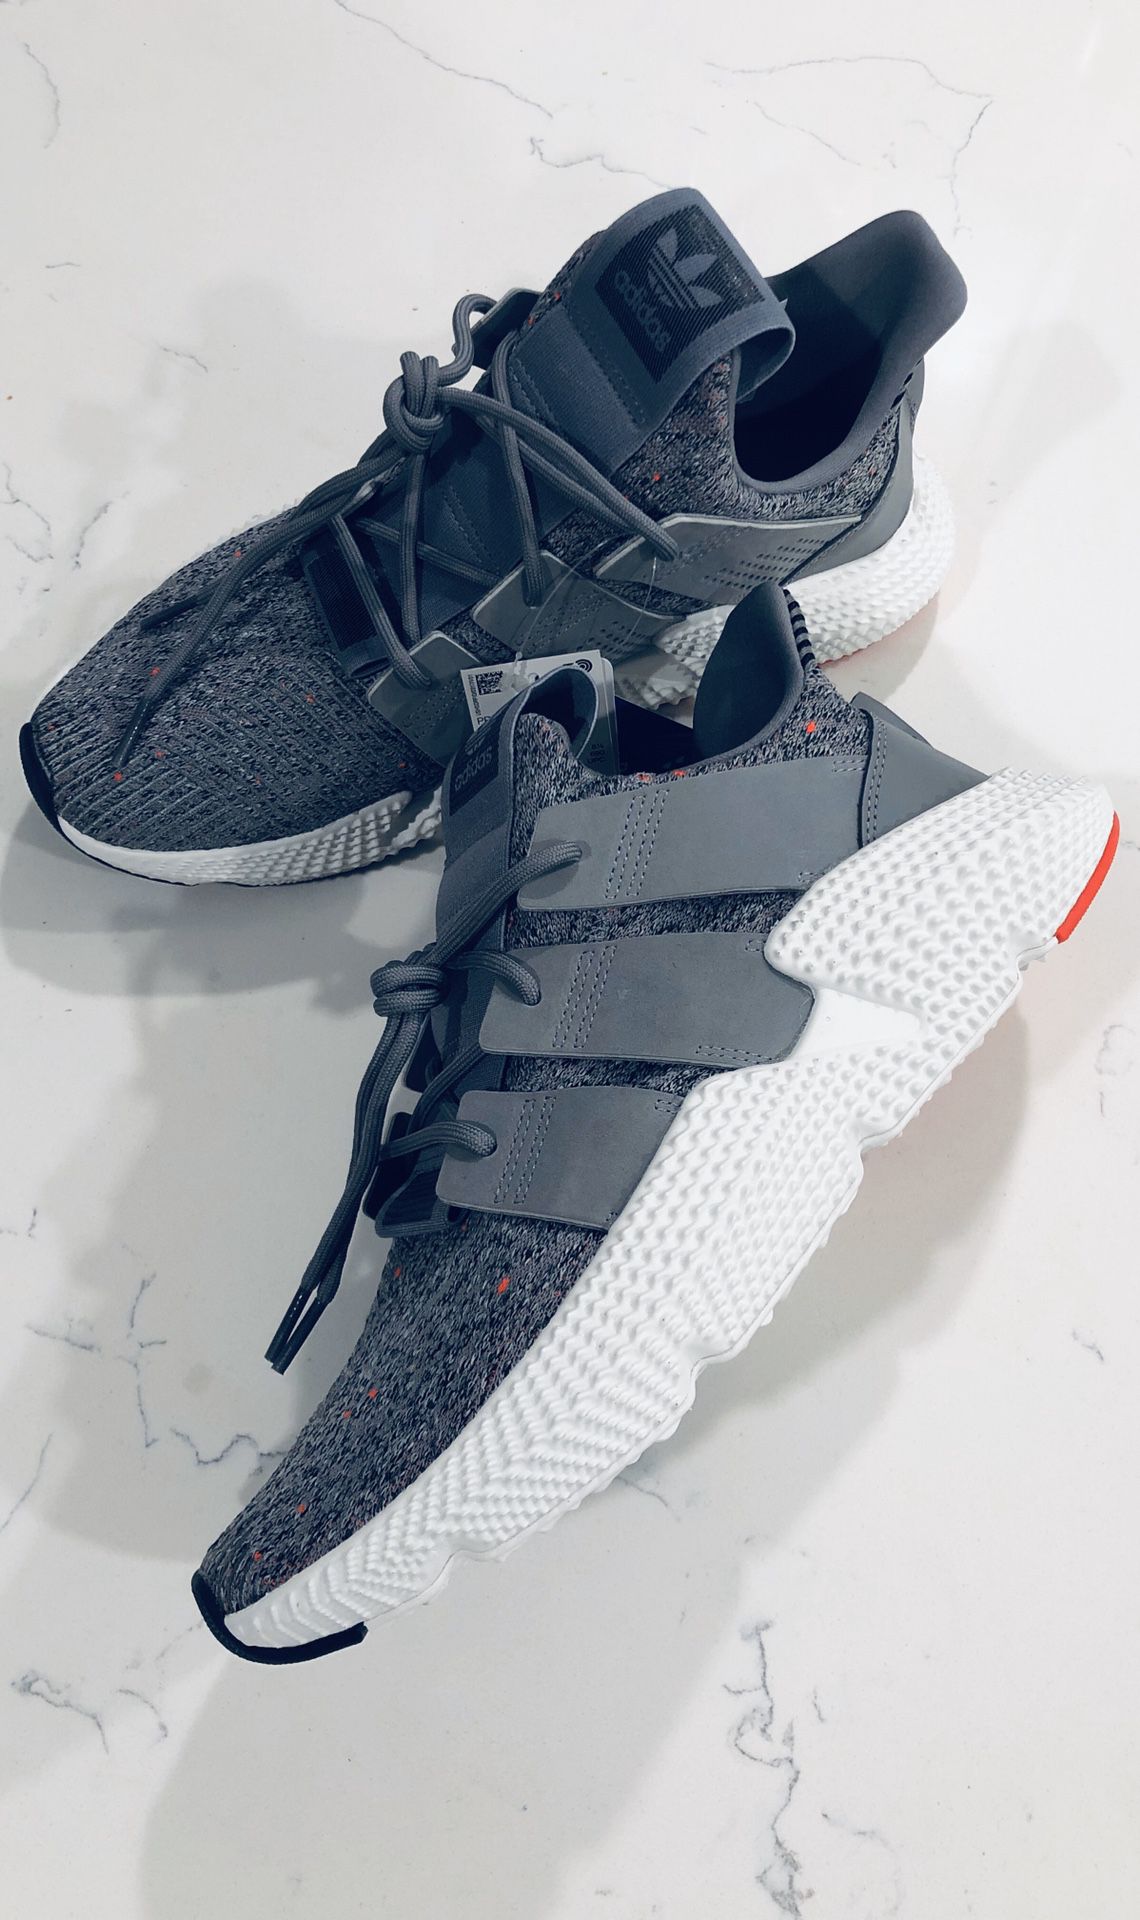 Adidas Prophere Mens Size 9